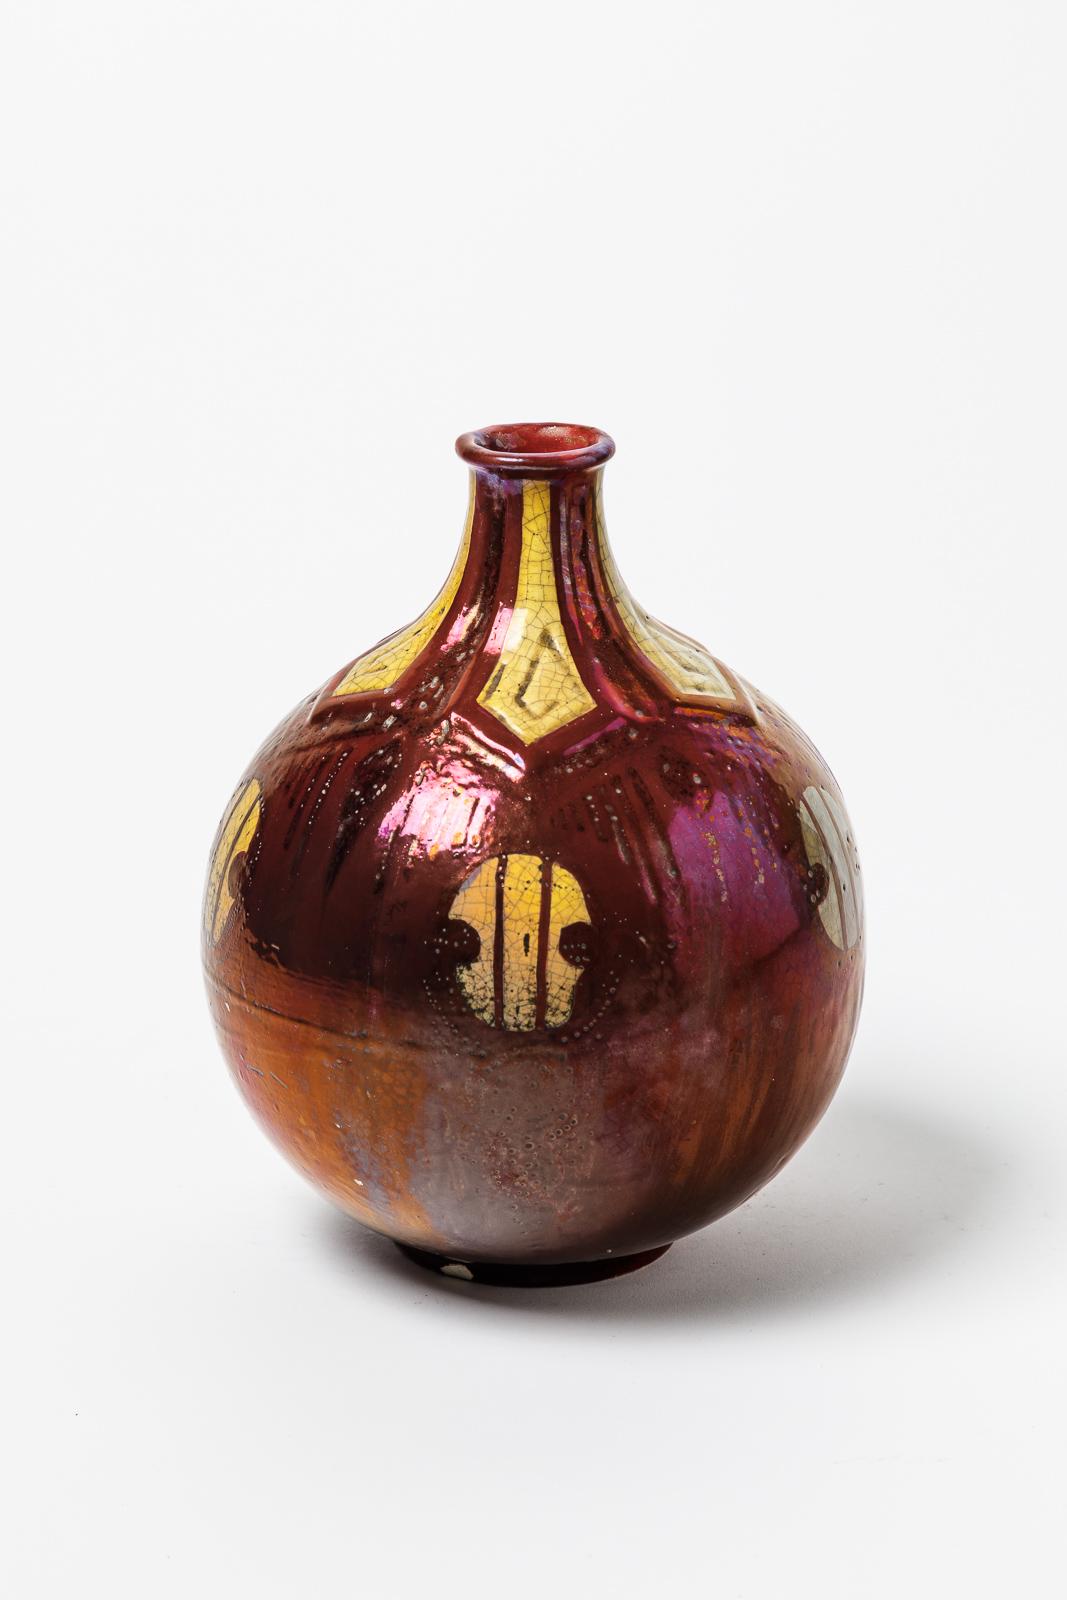 Émile and Bruneau Balon

Realised circa 1930

Original art deco ceramic vase realised in Blois, unique handmade piece

Shiny red and yellow ceramic glazes colors

Signed under the base 

Some small chips at the base that can be restored by